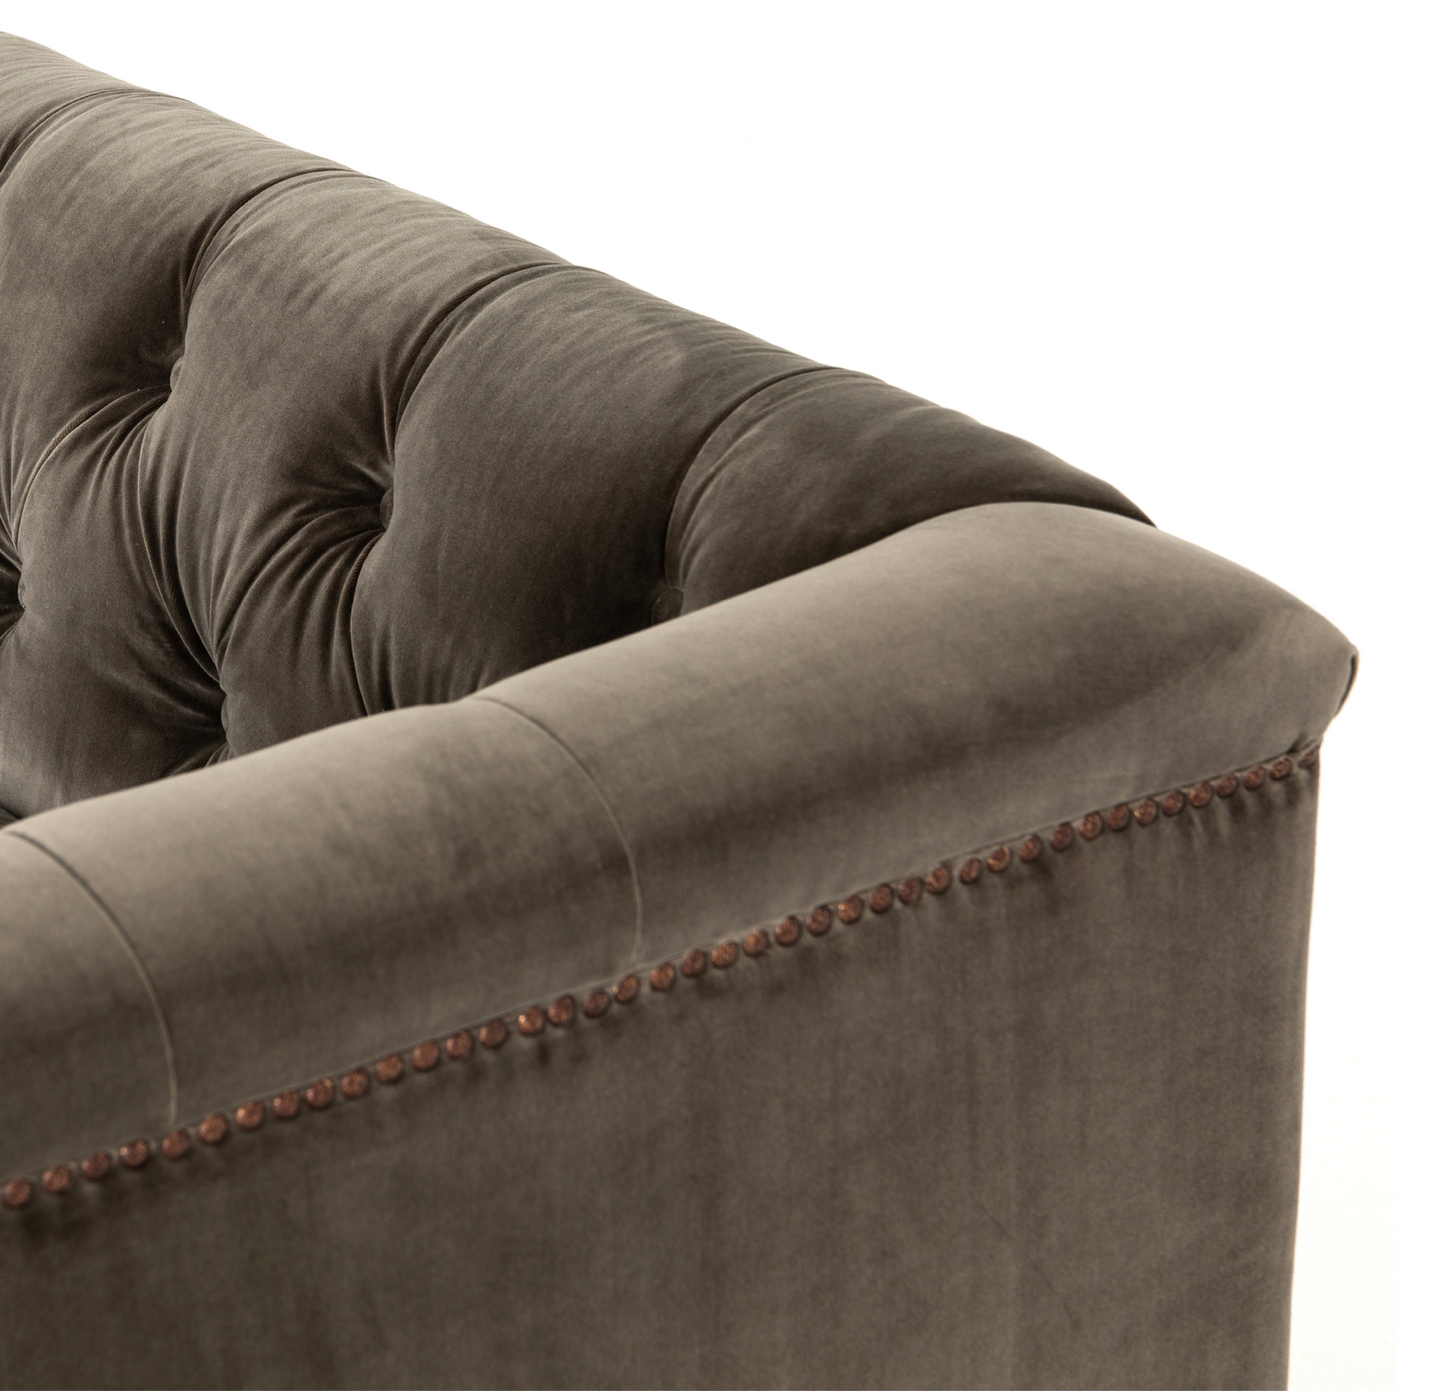 Brown tufted velvet library sofa with aged bronze nailhead trim